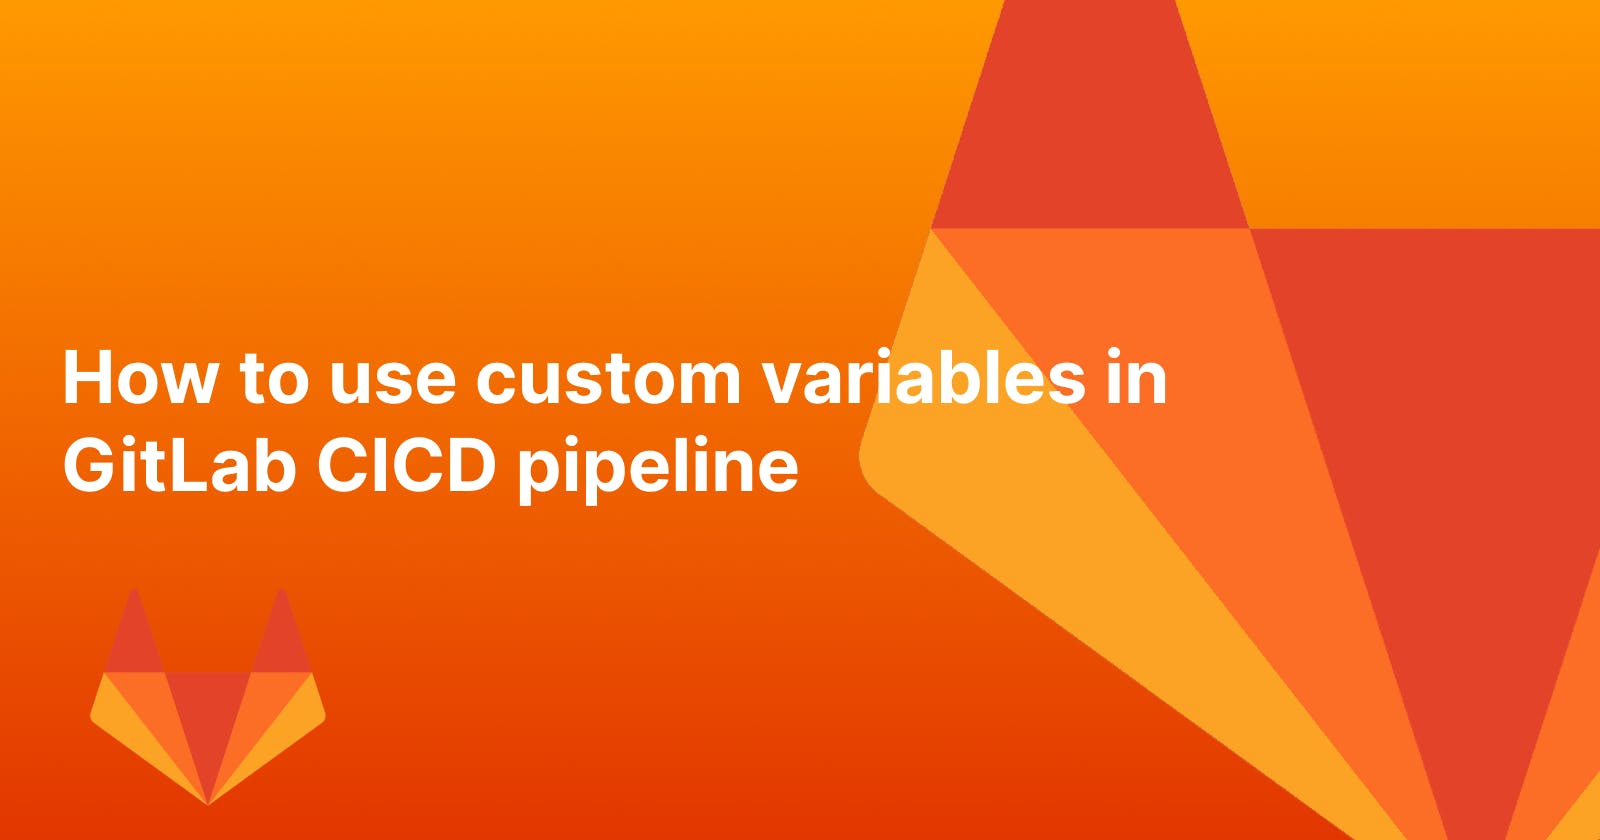 How to use custom variables in GitLab CICD pipeline